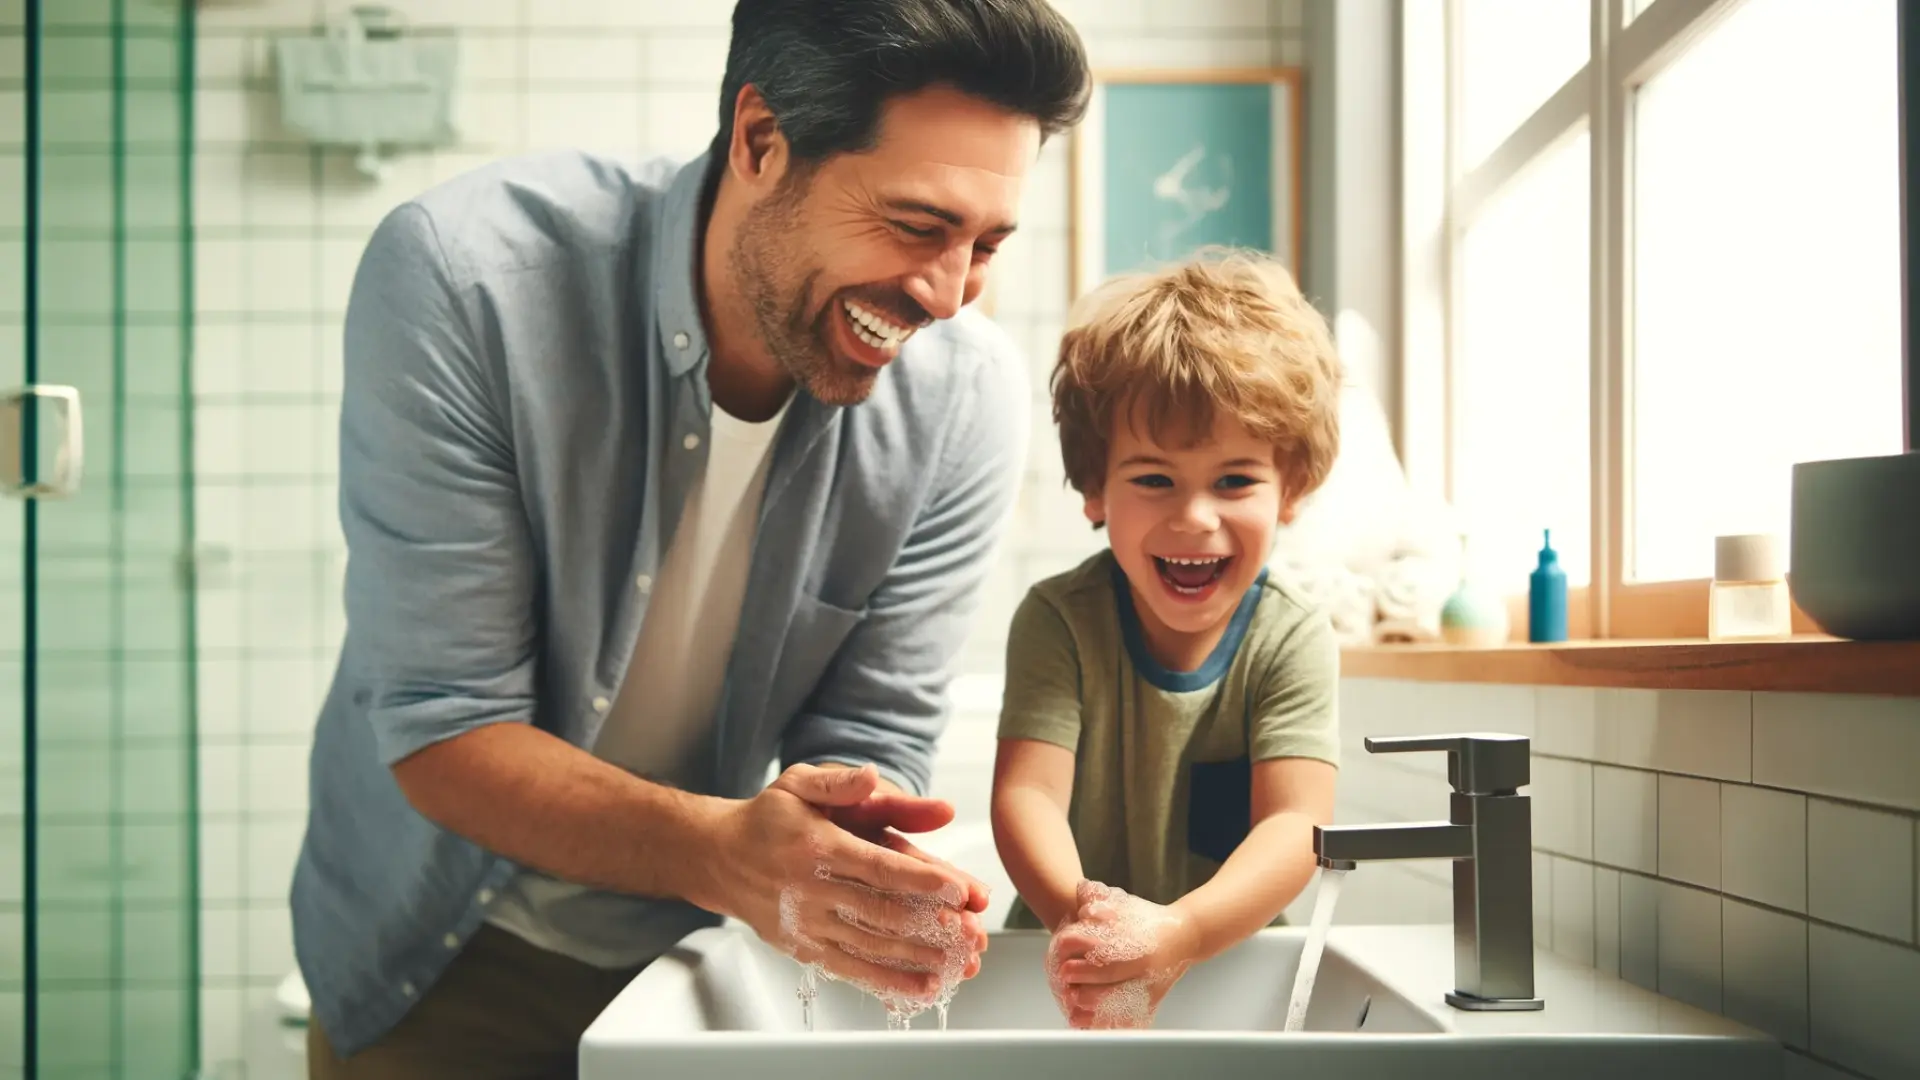 A father and his young son happily washing hands together at a bathroom sink, both smiling and laughing as water splashes around them.